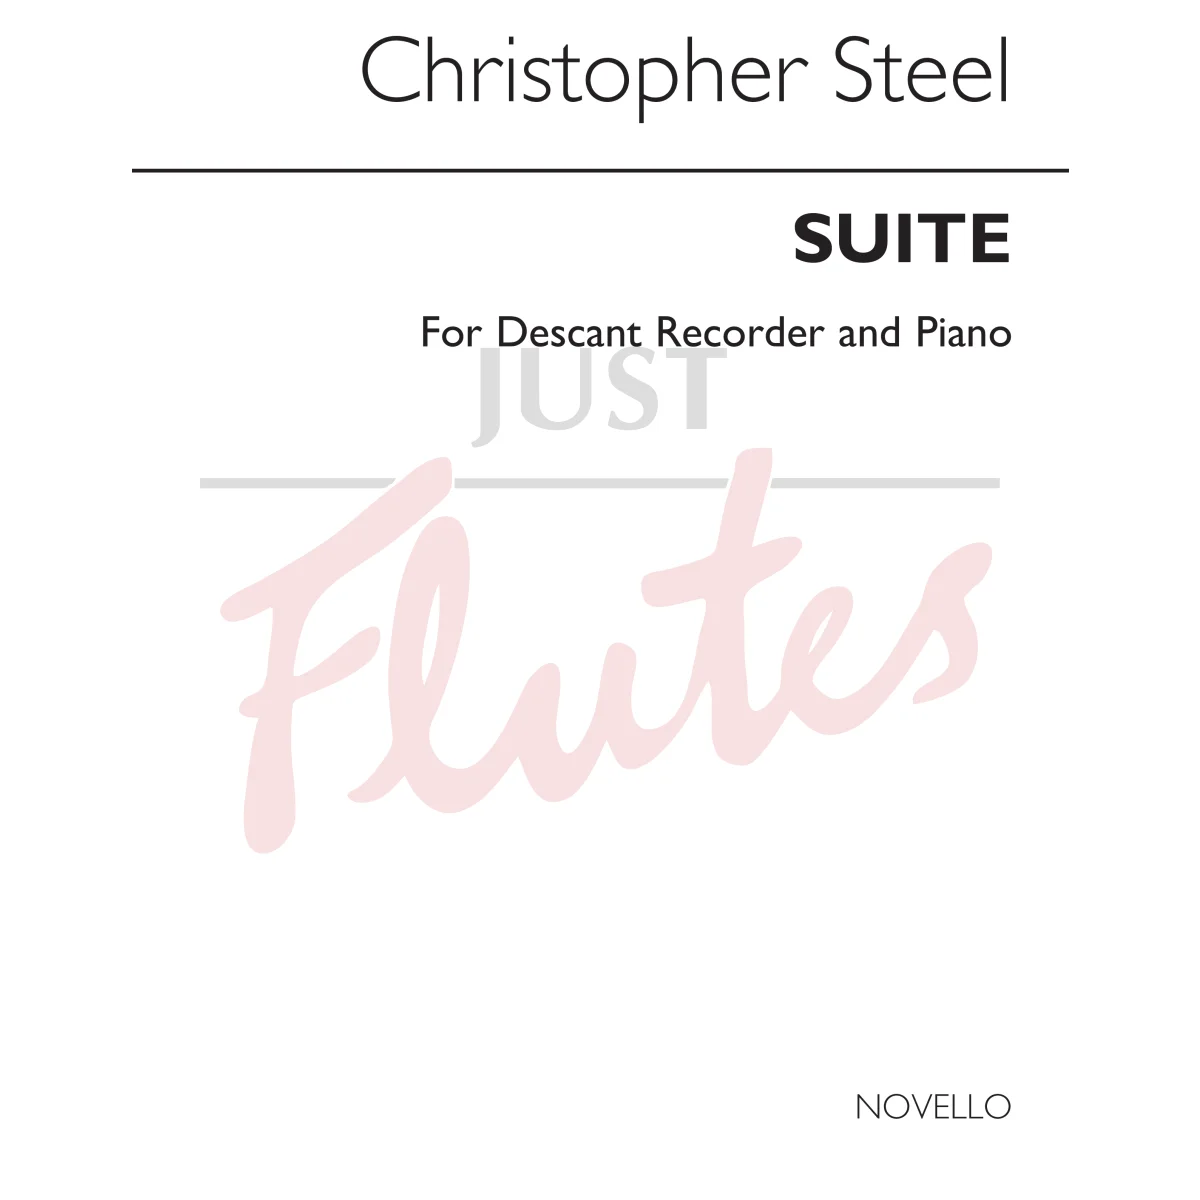 Suite for Descant Recorder and Piano